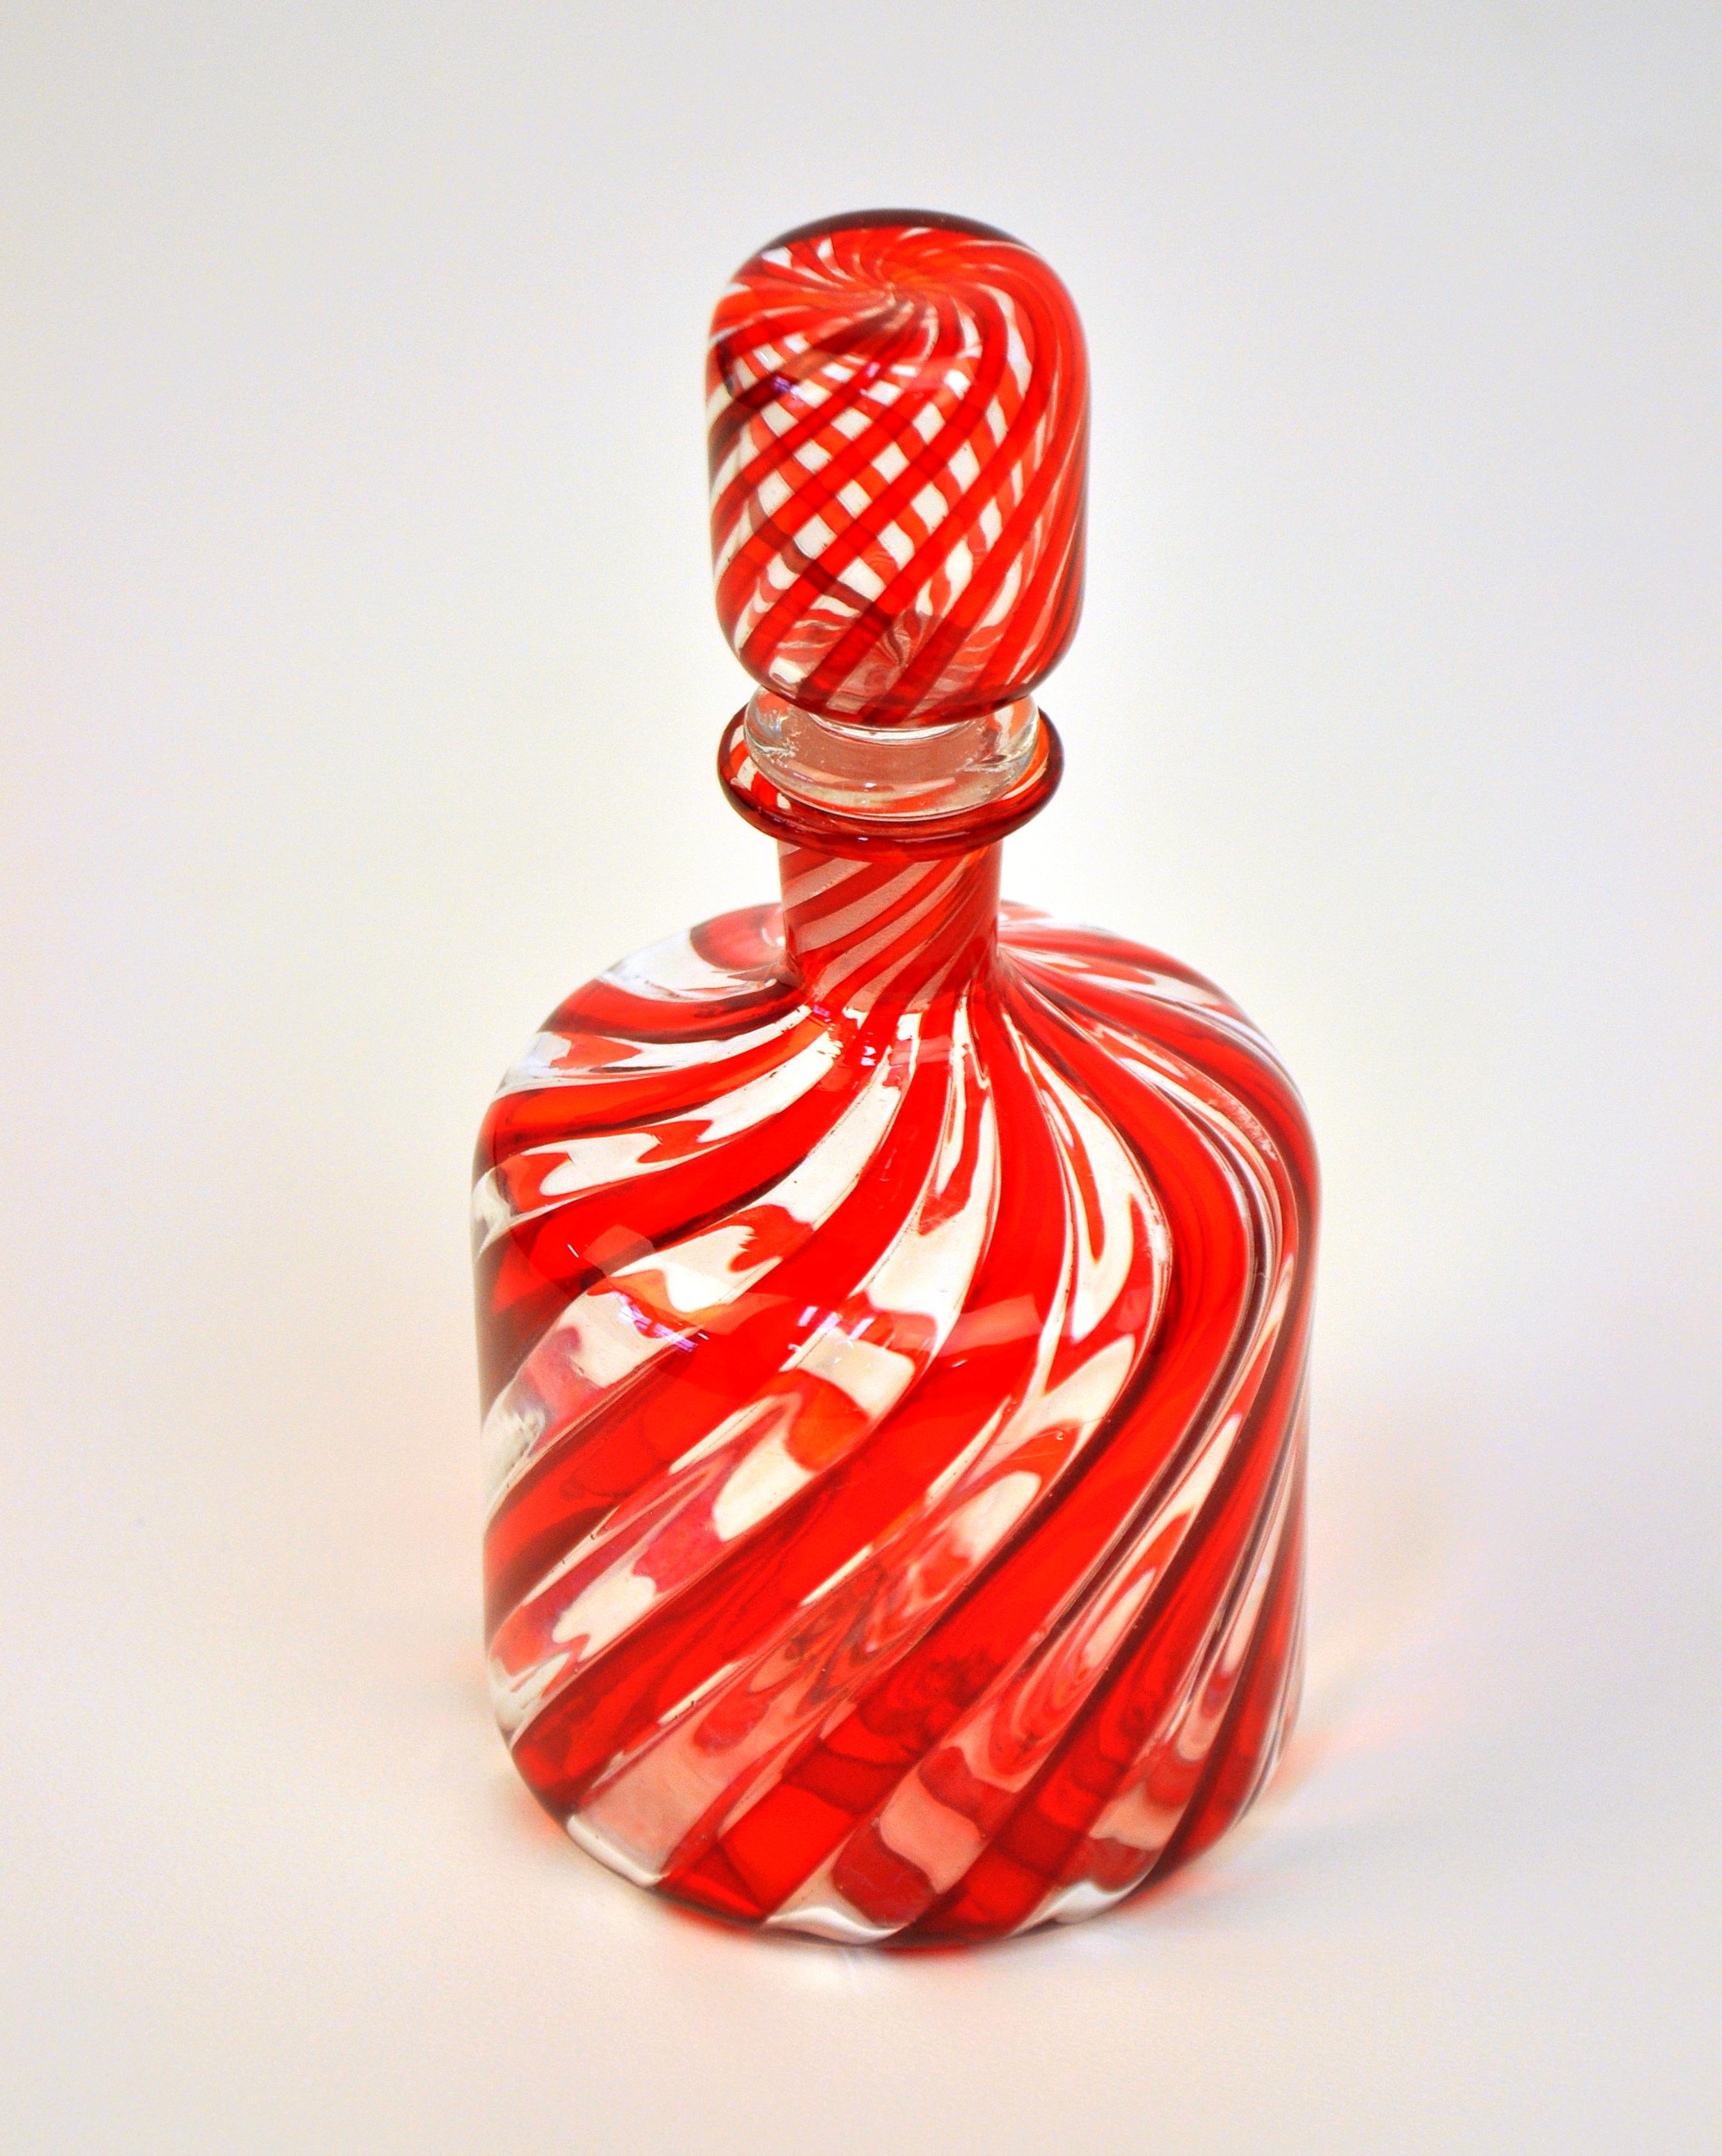 This Mid-Century Modern Venetian art glass small decanter or large perfume bottle features a red and clear swirl pattern. Manufactured by Fratelli Toso, the vintage Italian decorative bottle dates from the 1960s. Simple, elegant and timeless, much